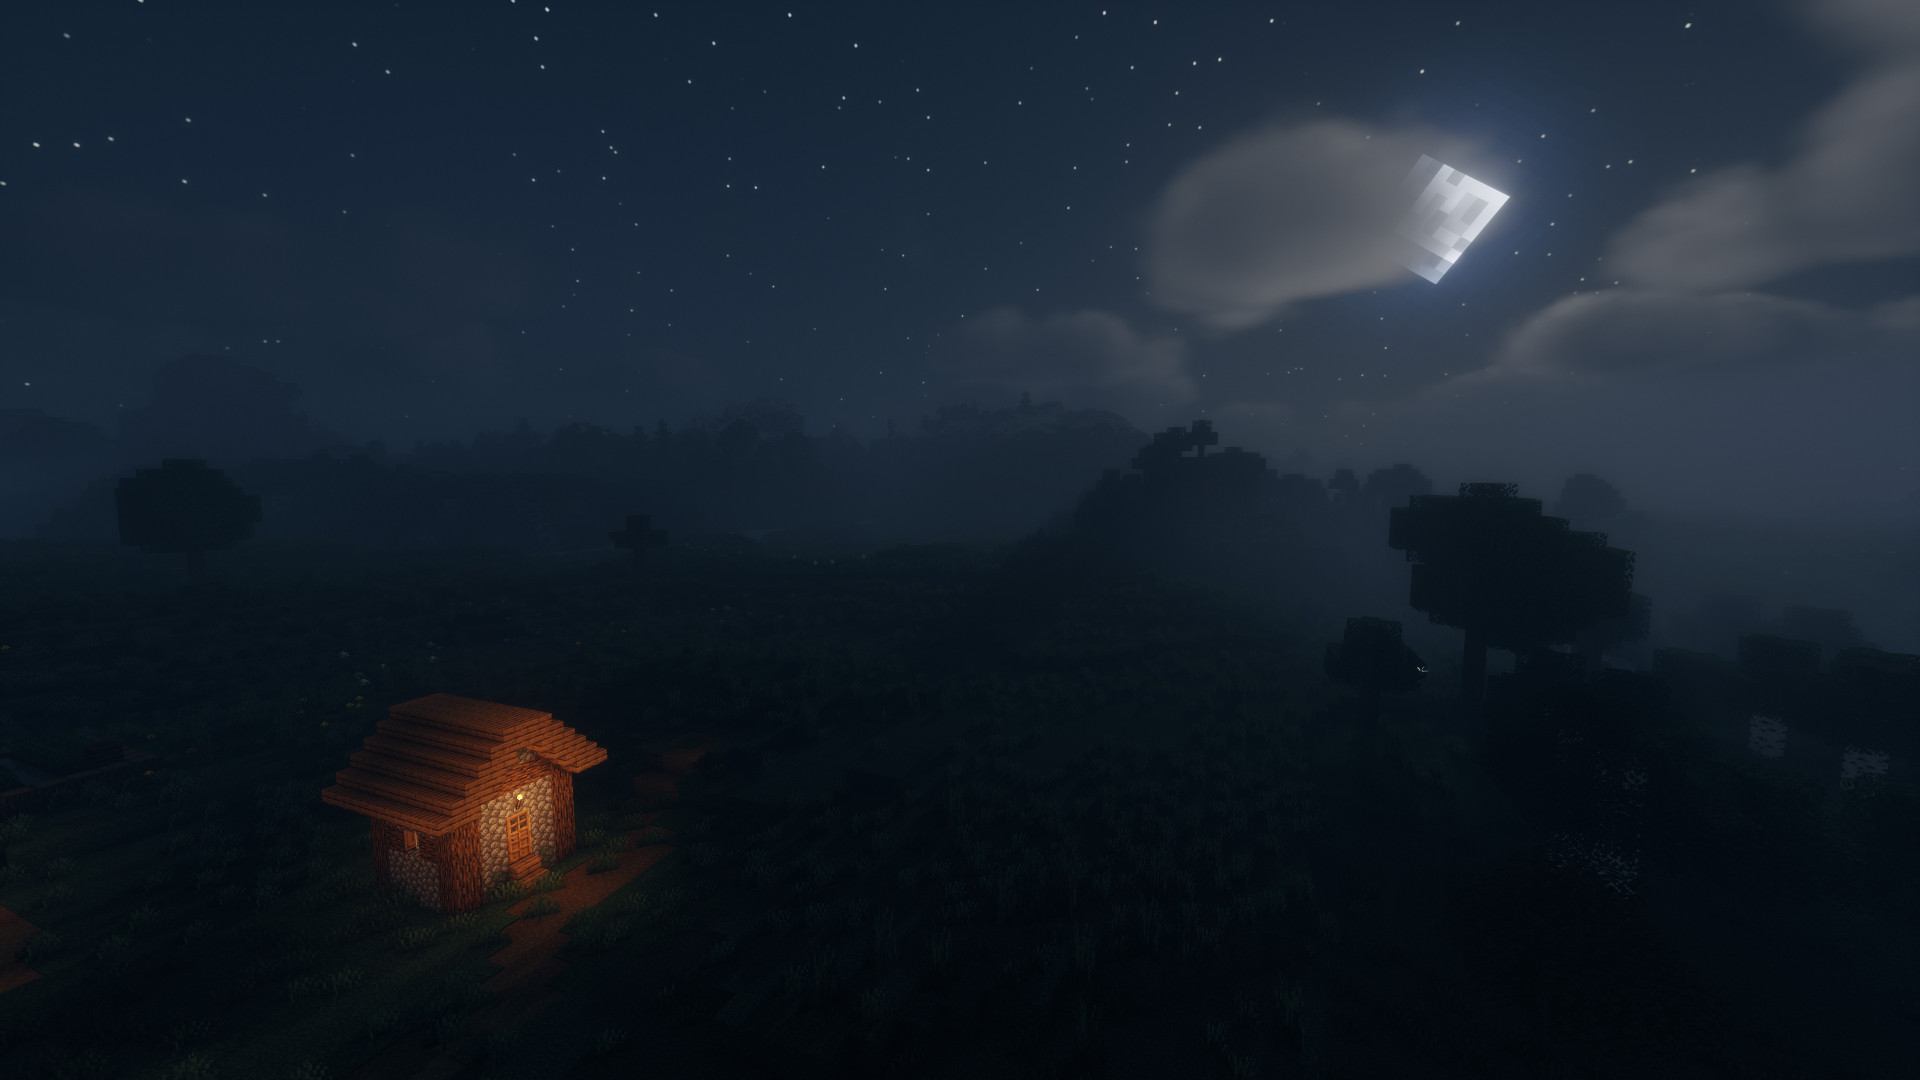 images/2406/14/Chocapic13_Shaders_7.jpg